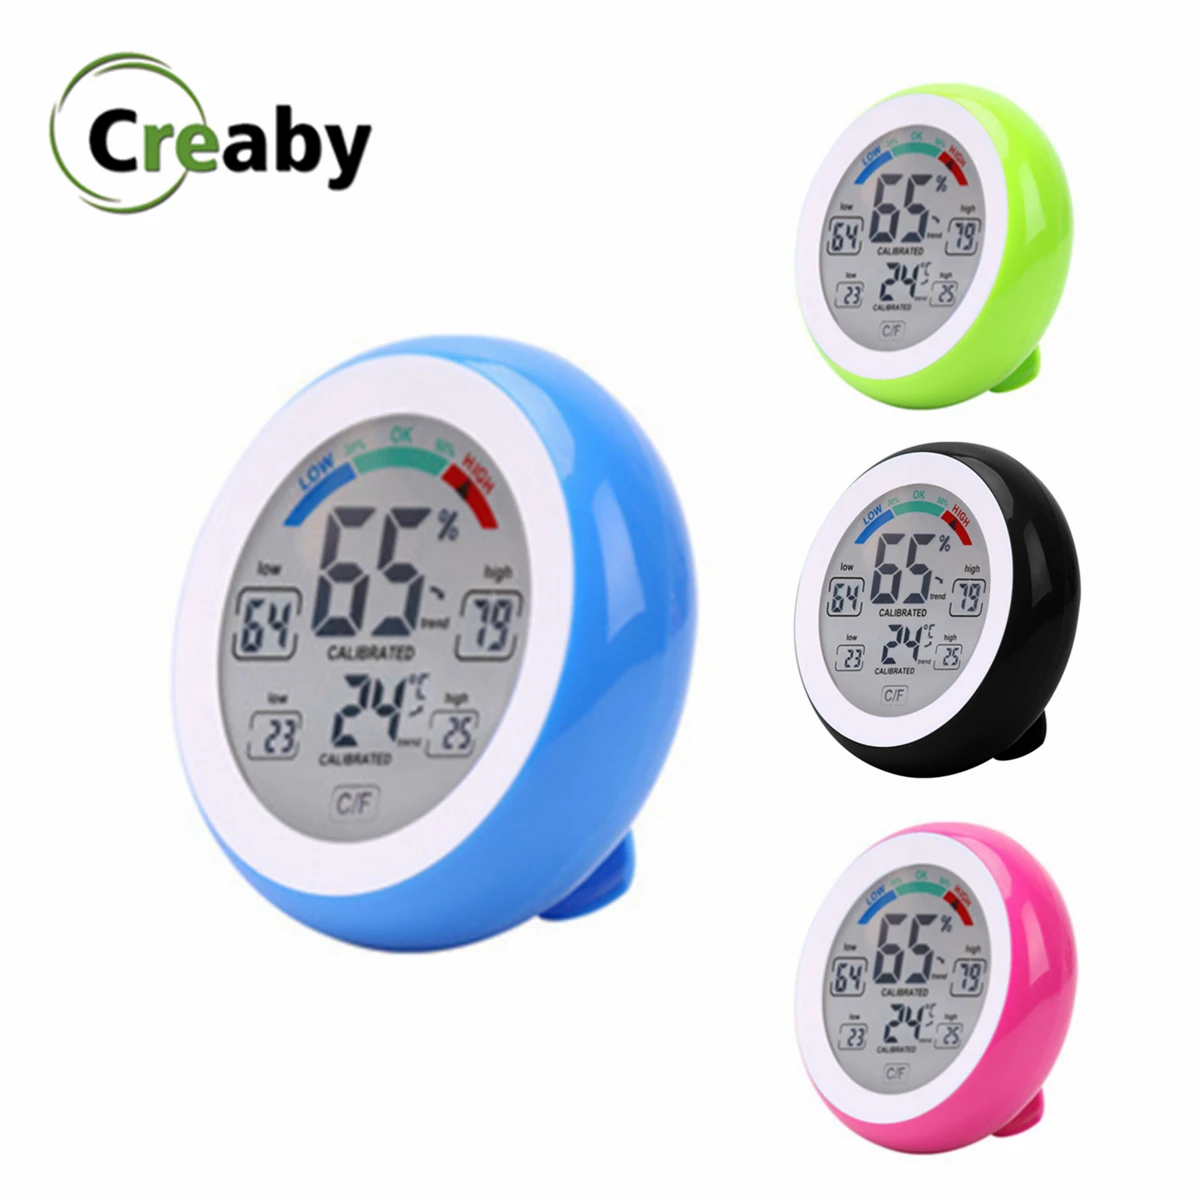 1X Digital LCD Display Indoor Thermometer Hygrometer Round Wireless Electronic Temperature Humidity Meter Weather Station Tester